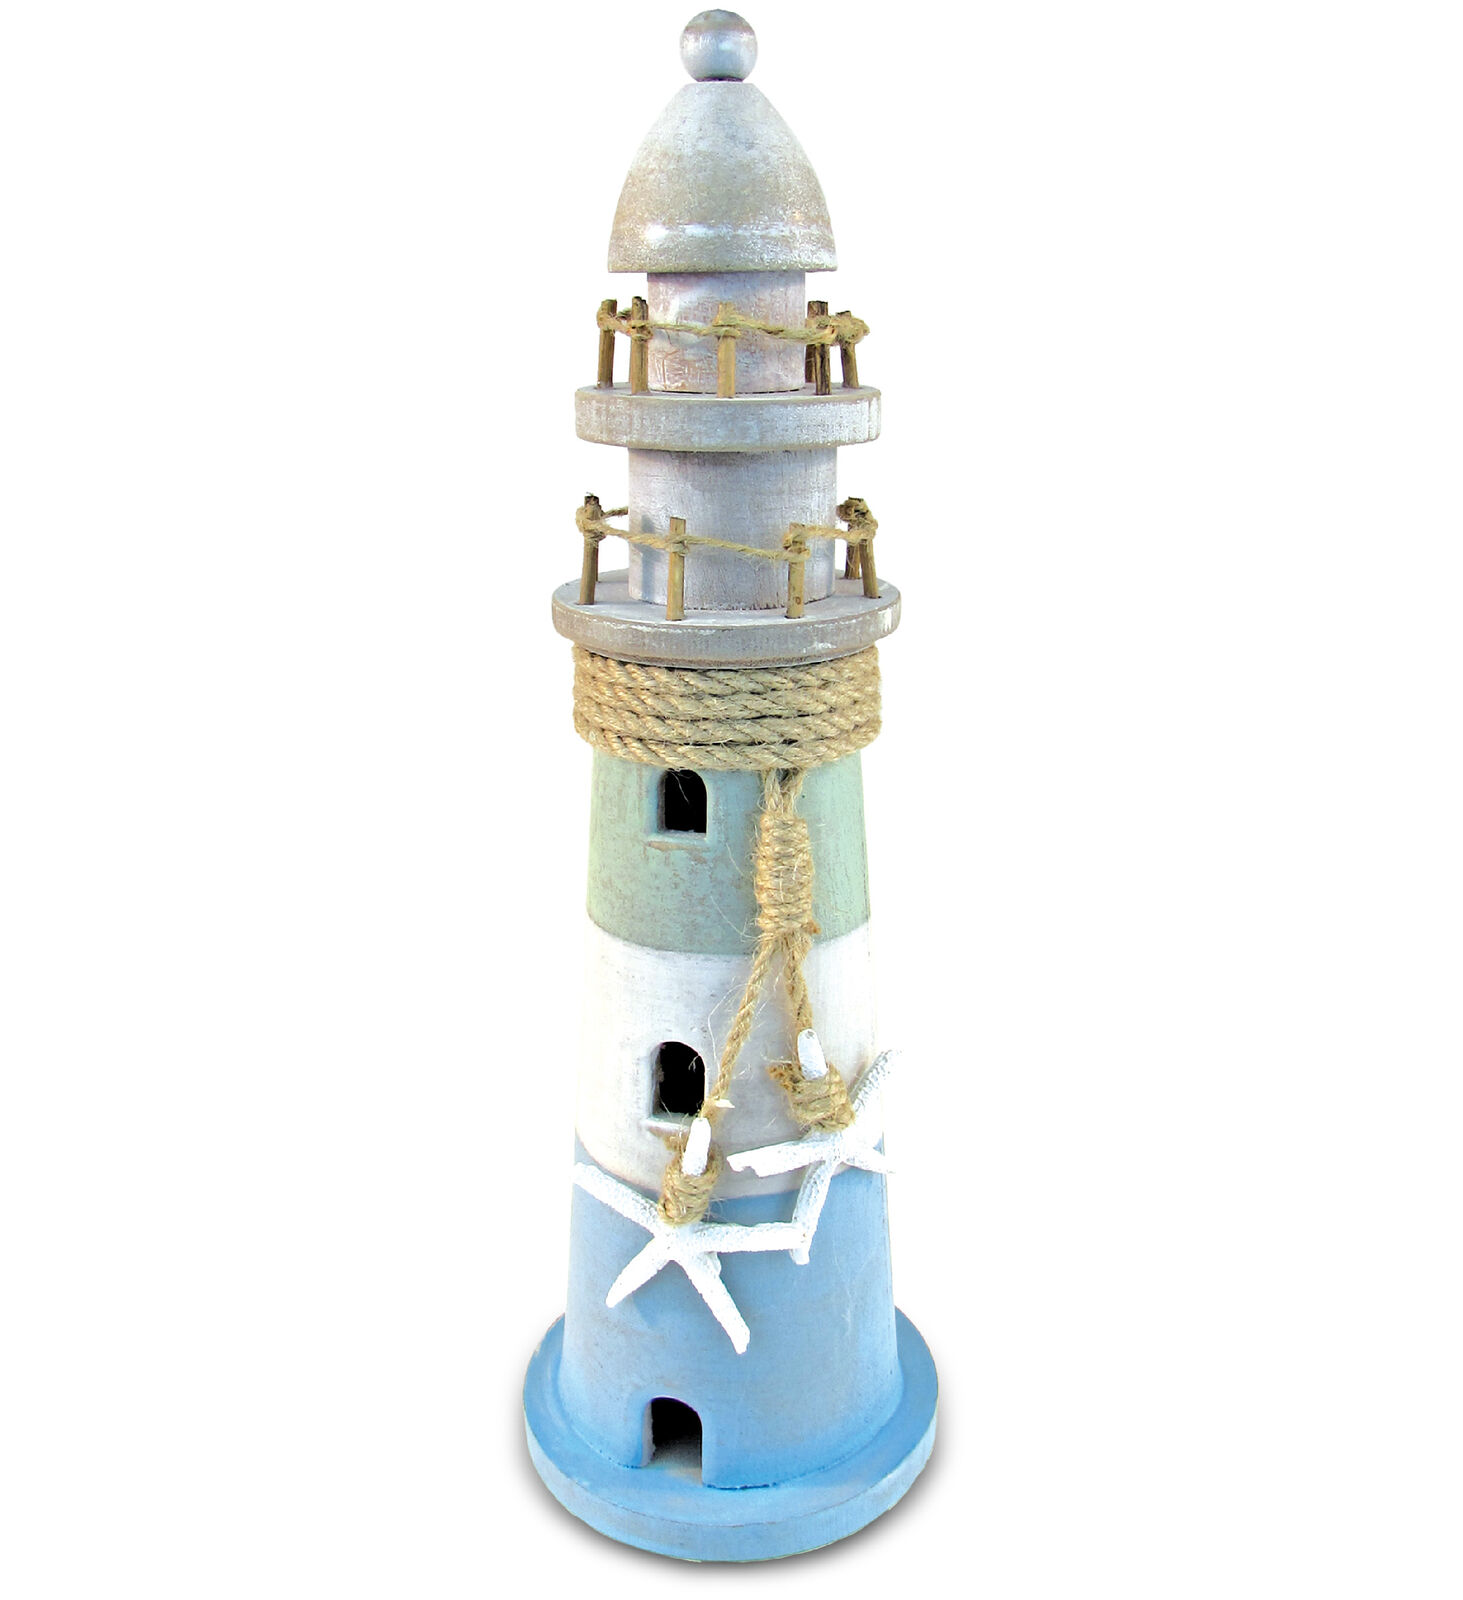 CoTa Global Handmade Ocean Breeze Lighthouse Decor with Starfish - 12.25 Inches